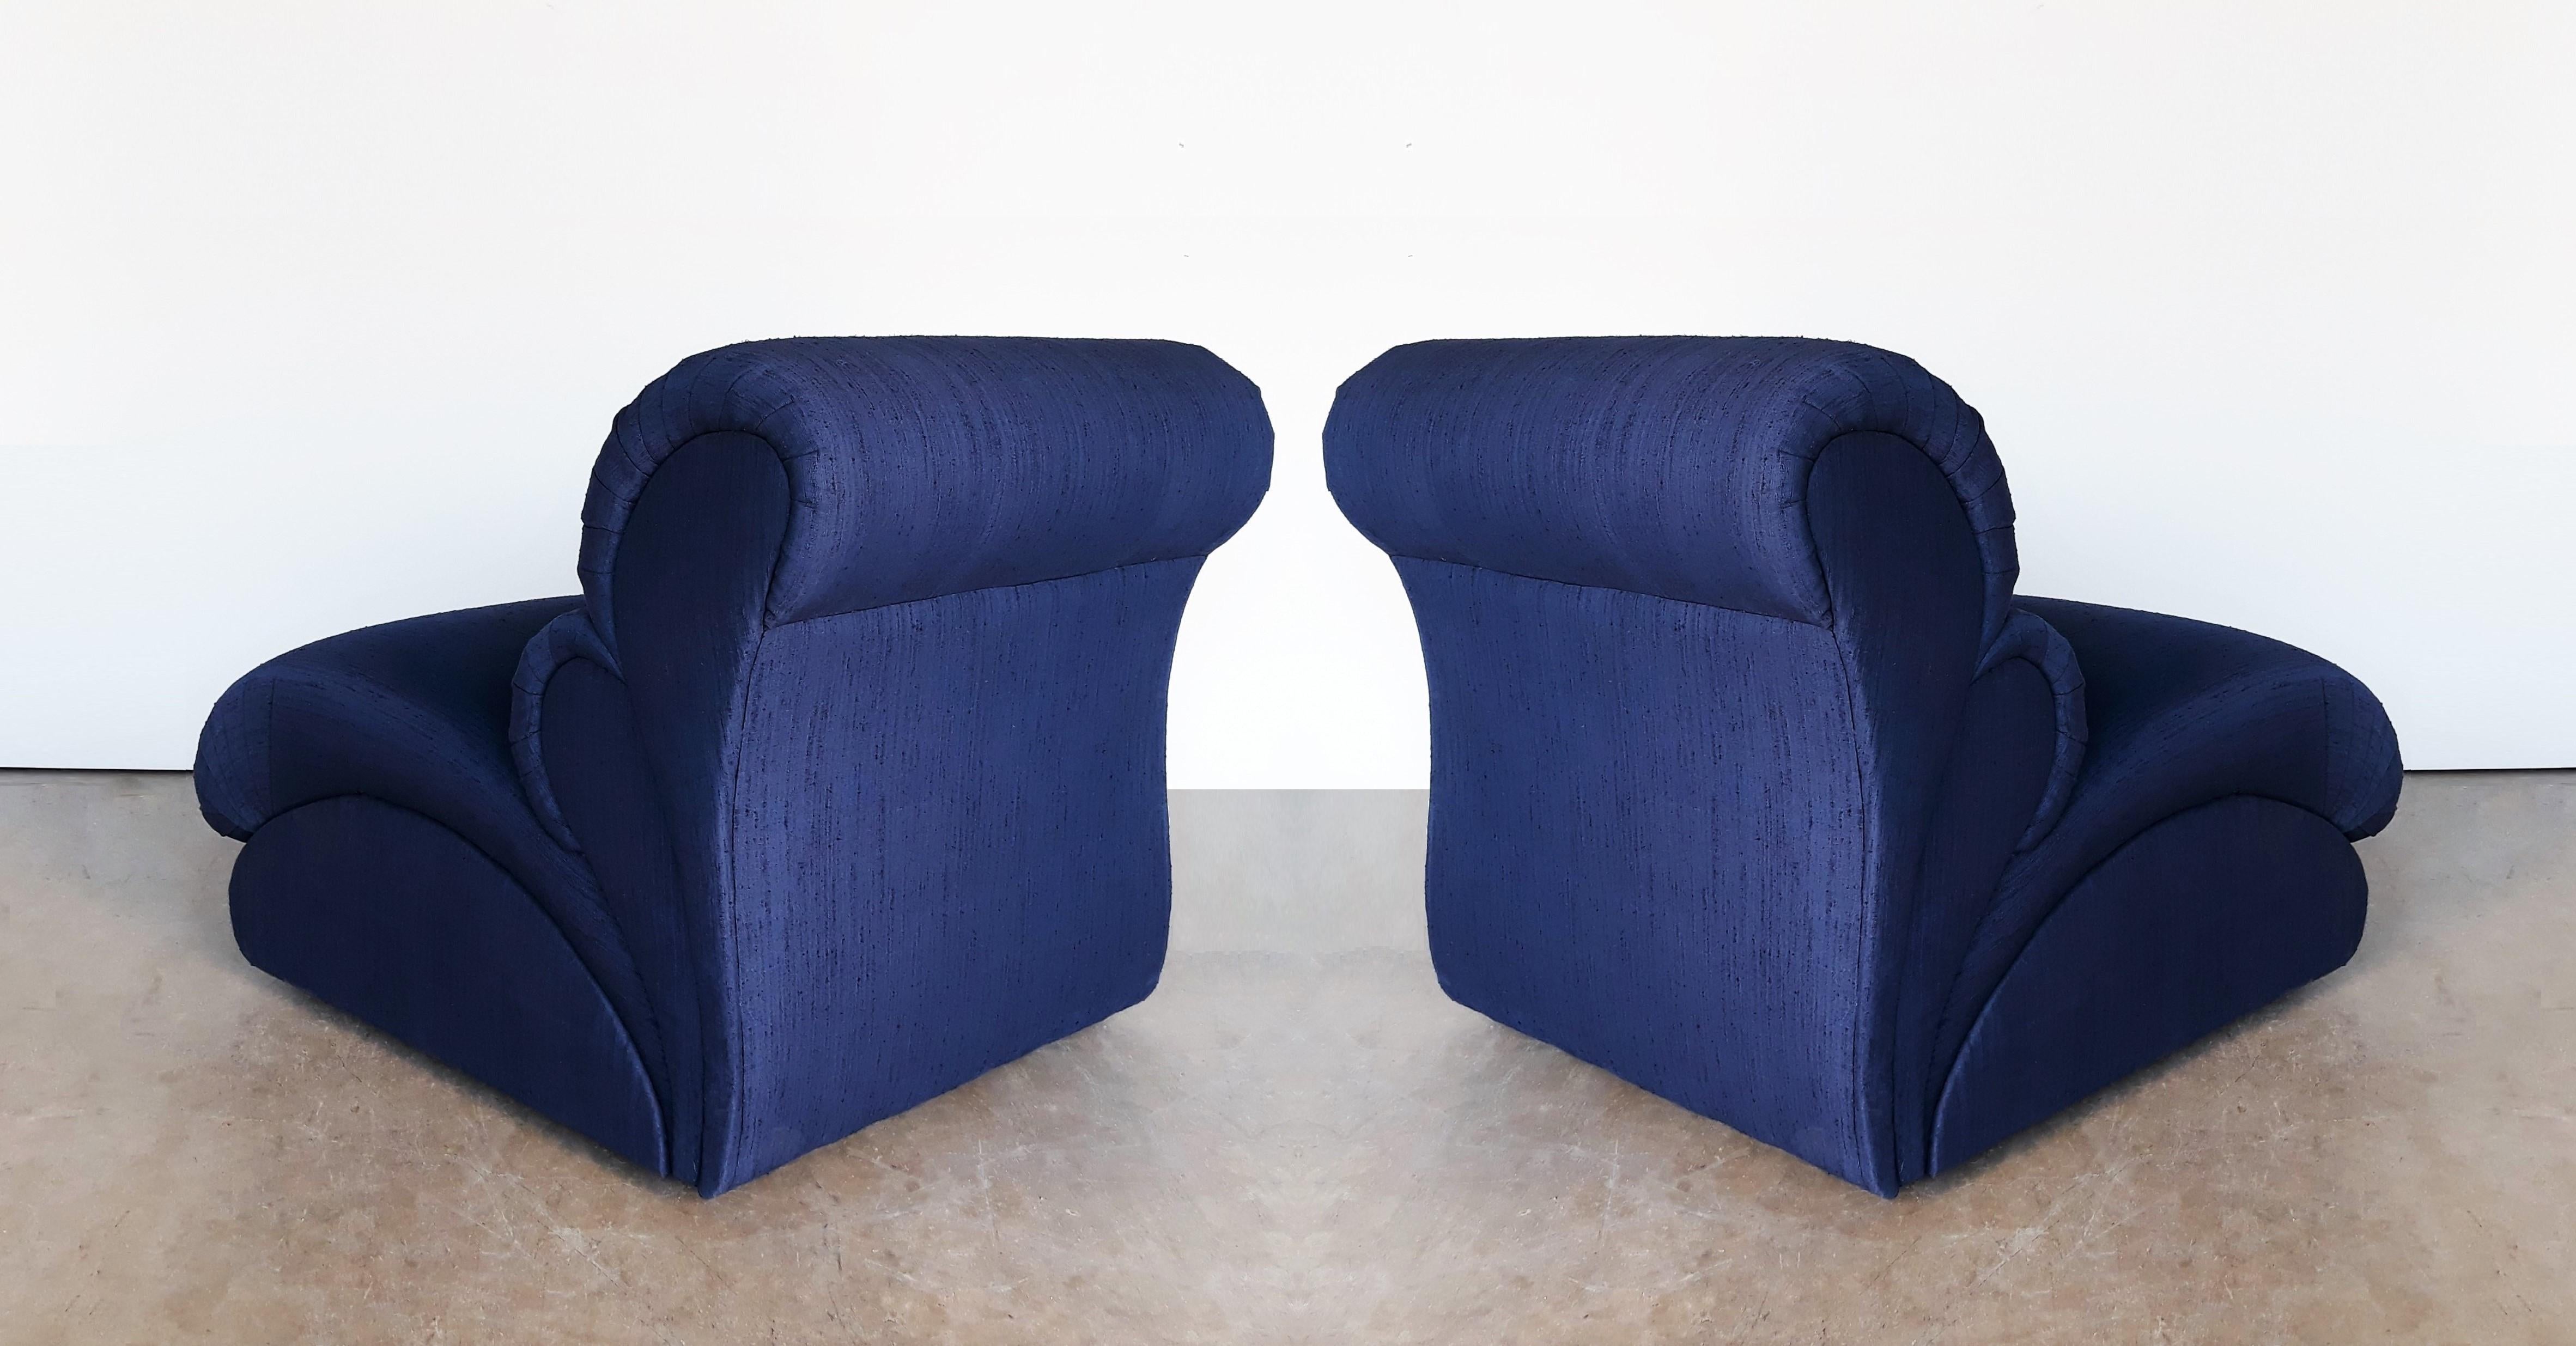 Late 20th Century Pair of Modern Biomorphic Lounge Chairs by Weiman, 1980s For Sale